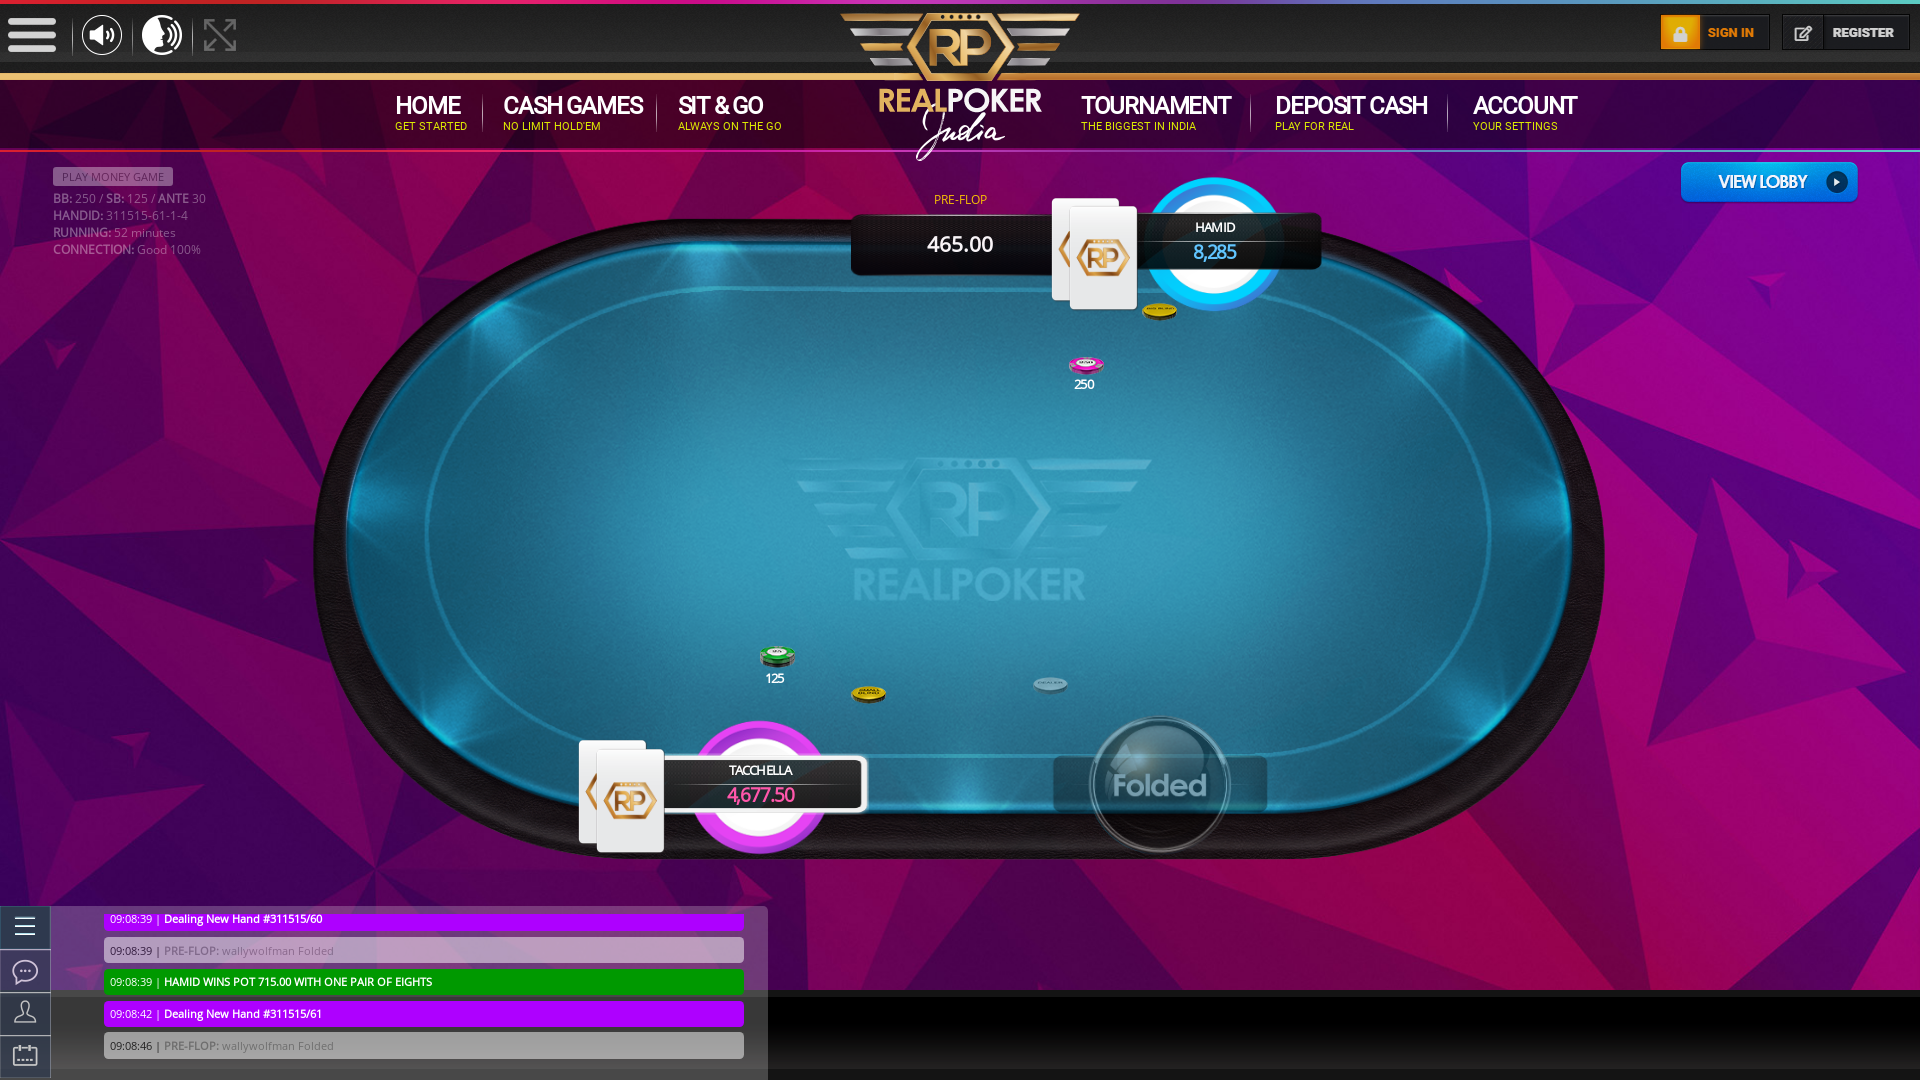 Indian online poker on a 10 player table in the 52nd minute match up